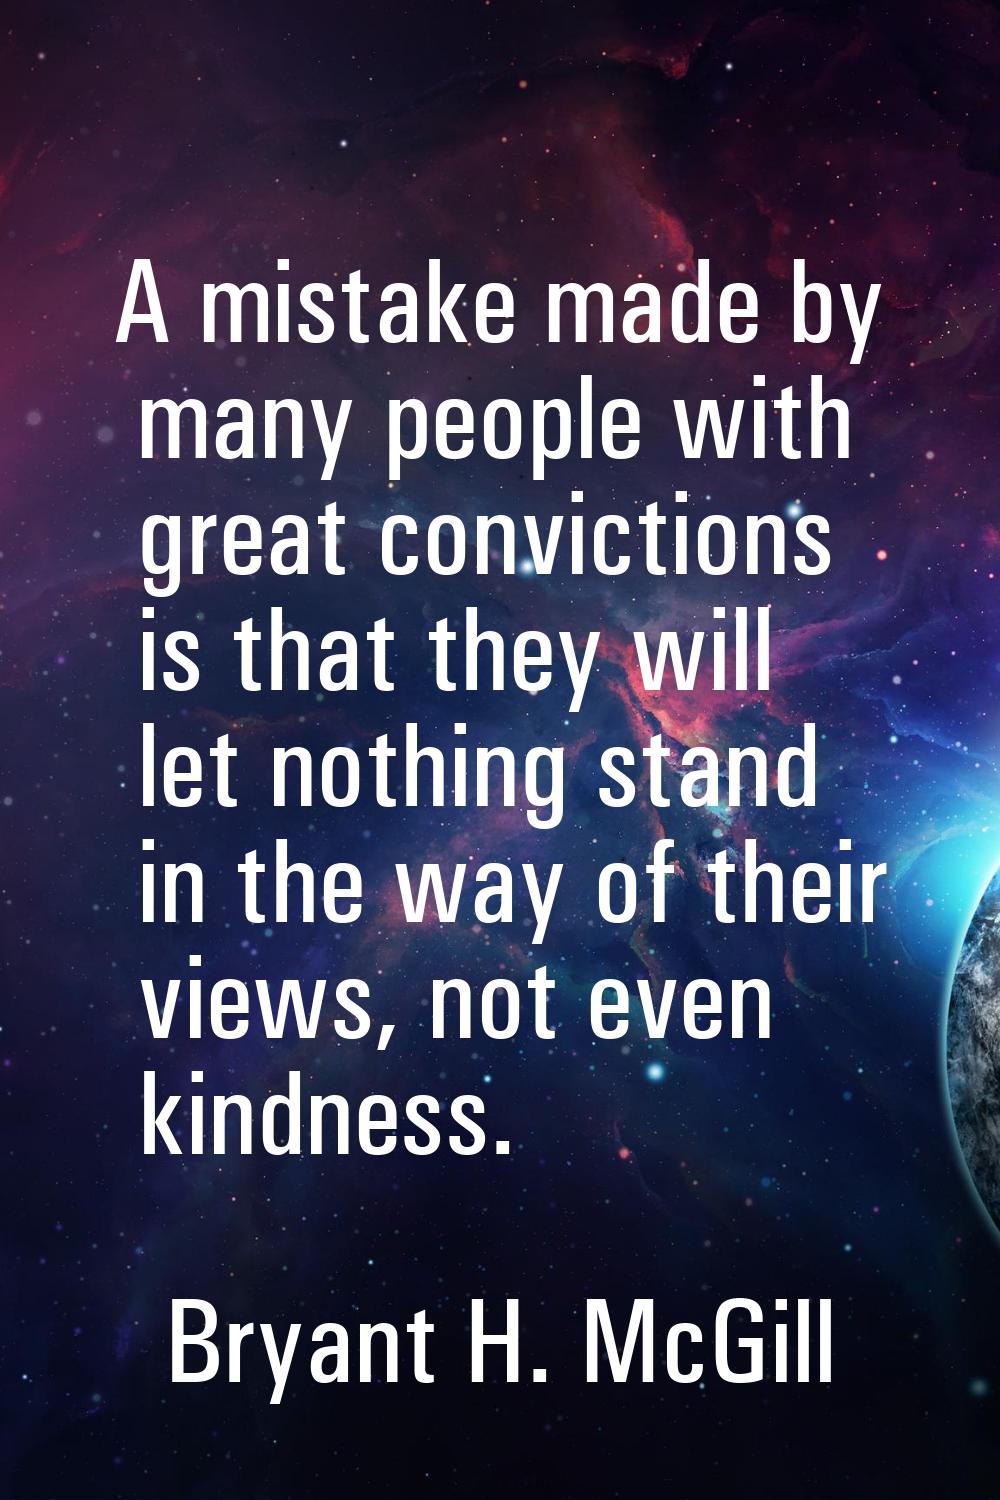 A mistake made by many people with great convictions is that they will let nothing stand in the way